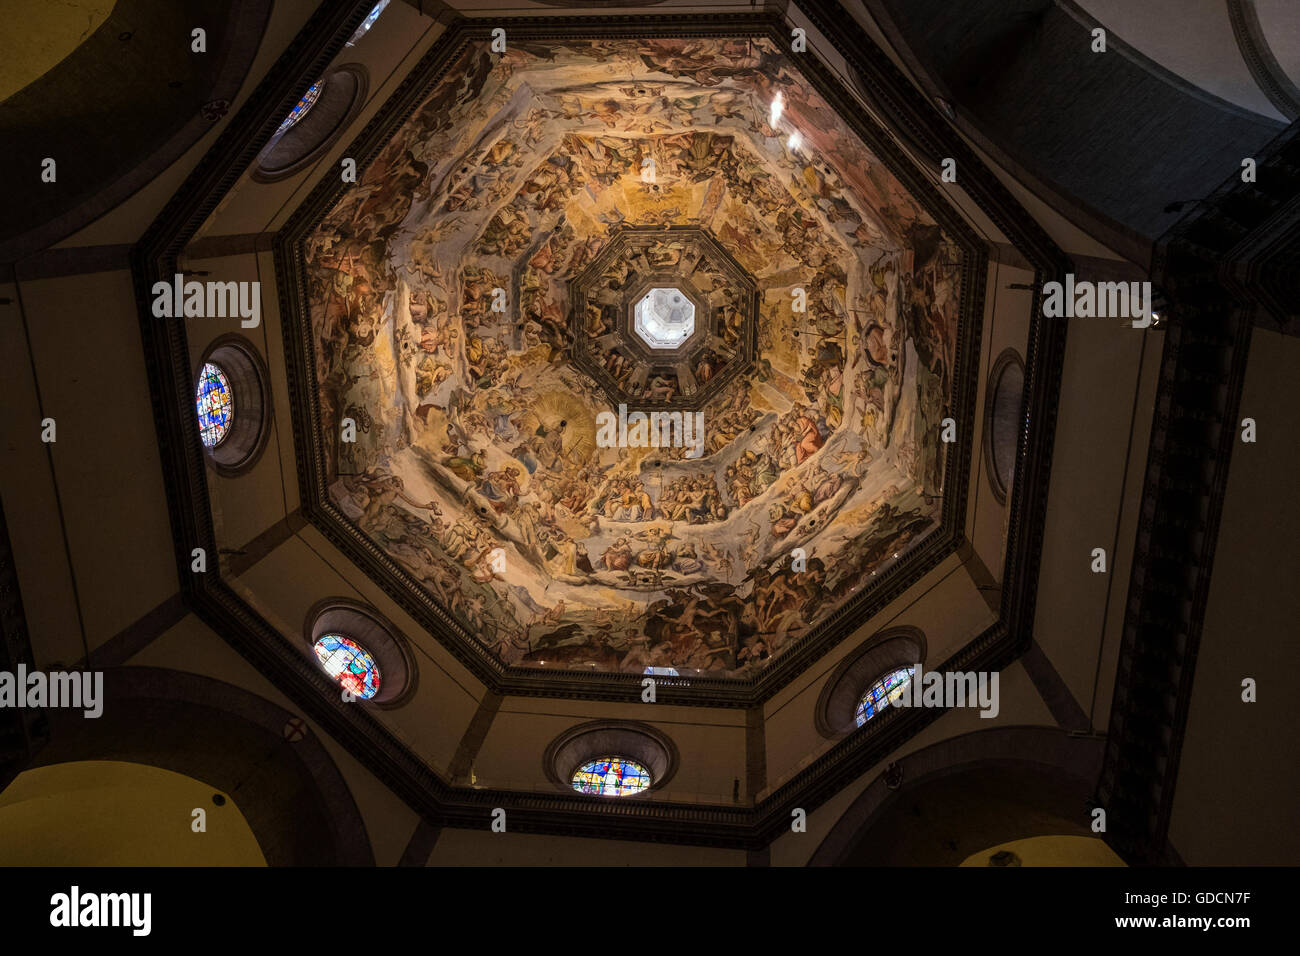 Painted ceiling of the Duomo, dome, of the cathedral di Santa Maria del Fiore, Florence, Tuscany, Italy Stock Photo